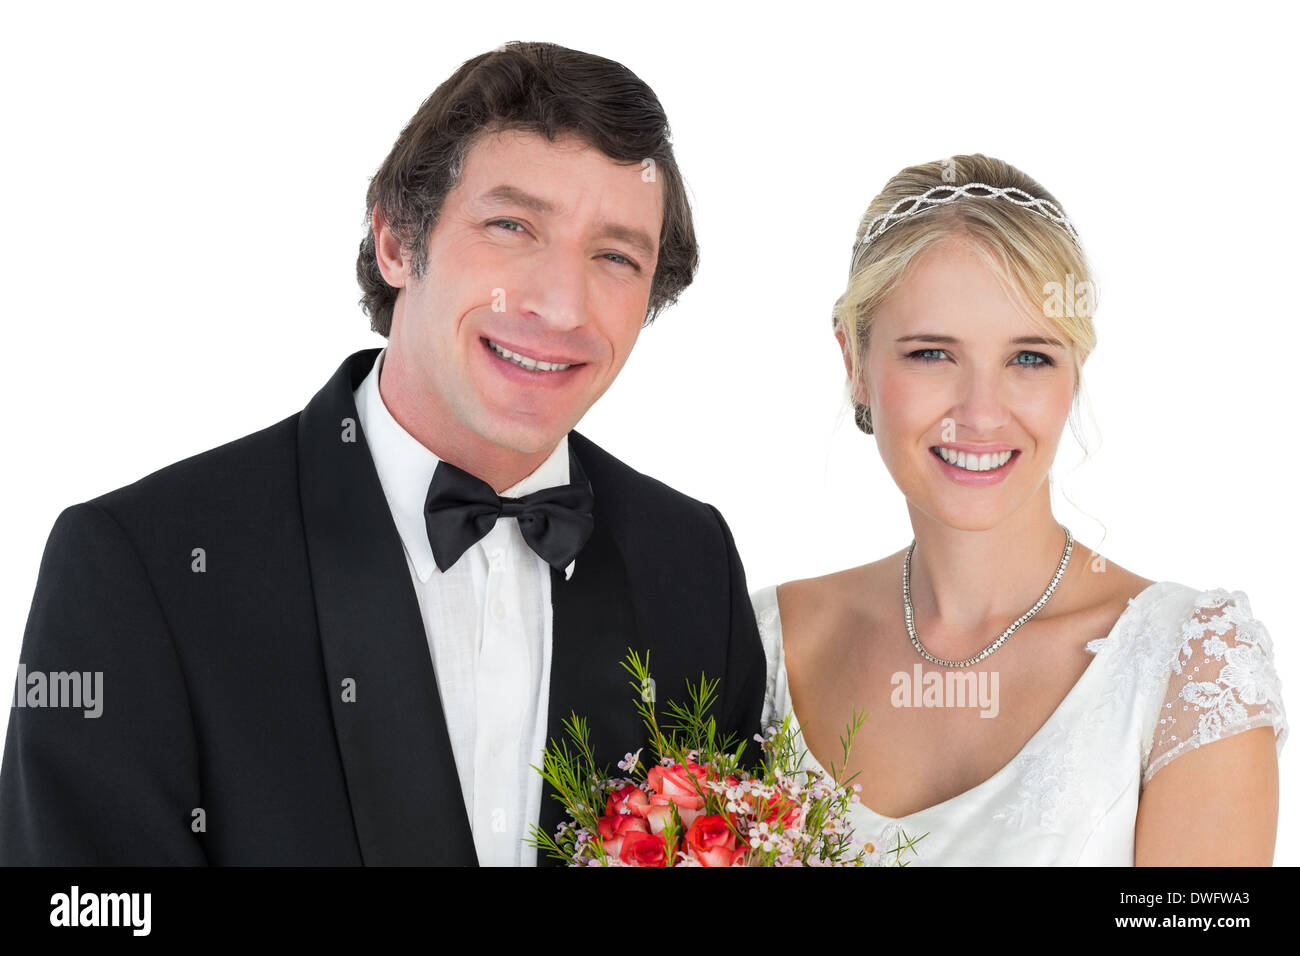 Newly wed couple smiling over white background Banque D'Images